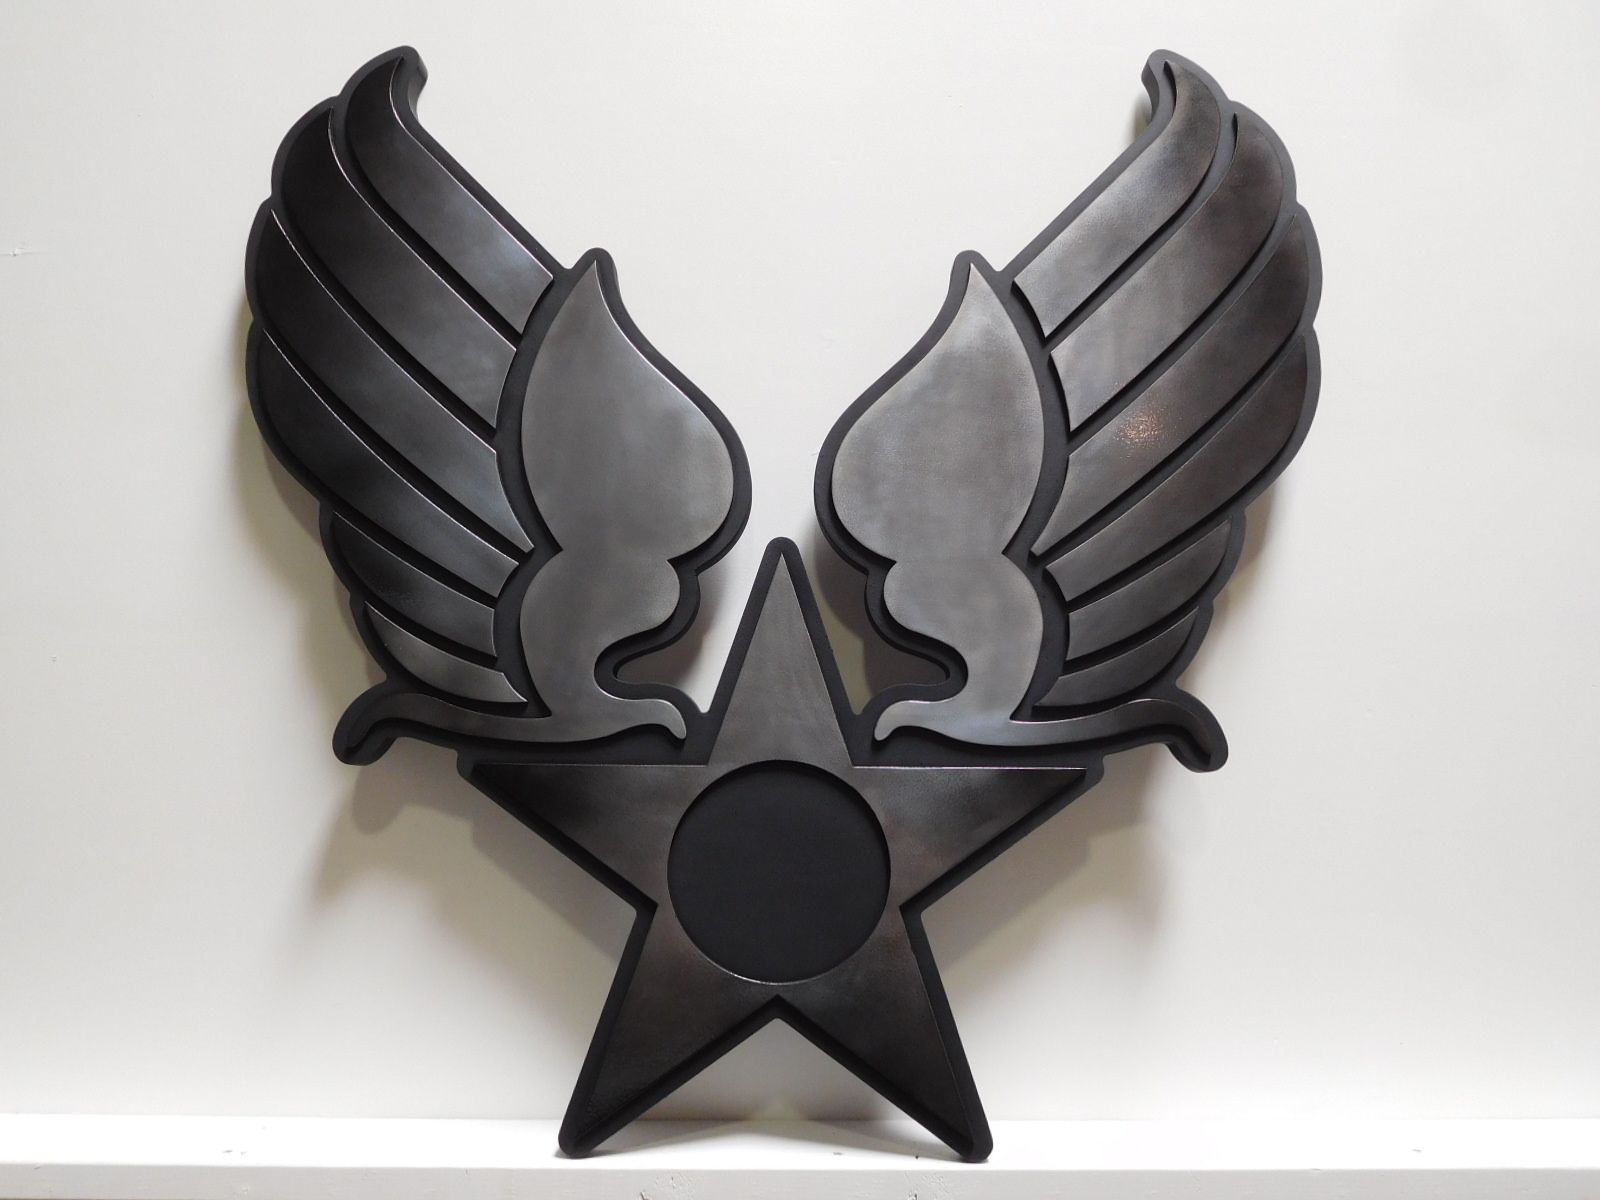 MP-2410- Carved Plaque of a Crest for a US Army Unit , 2.5D Painted in Black and Metallic Silver